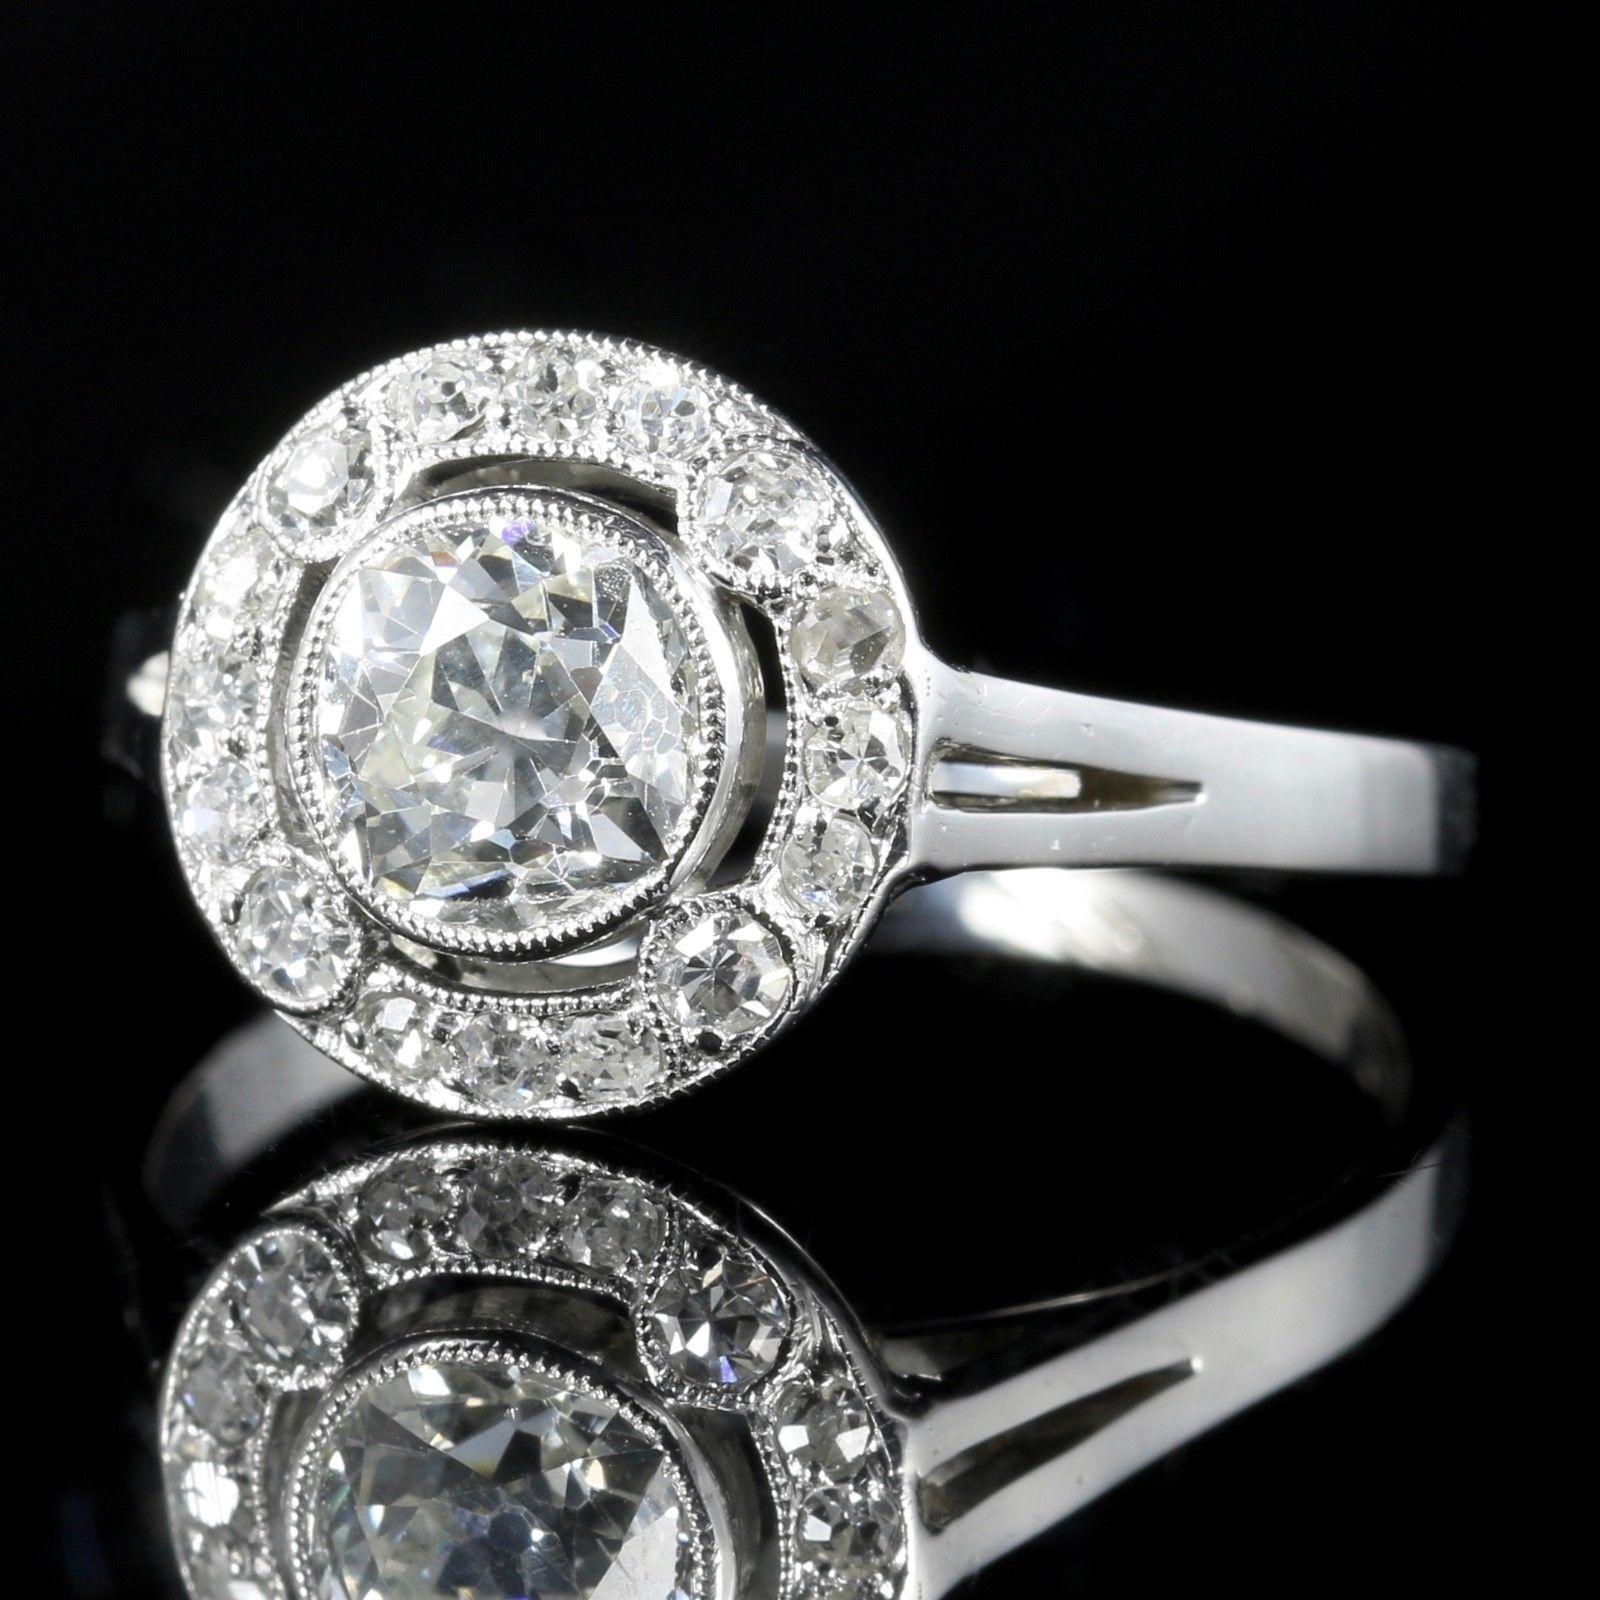 For more details please click continue reading down below...

This amazing Antique Art Deco all Platinum Diamond ring is stunning.

Circa 1920

Set with a central 1ct old cut Diamond surrounded by a halo of old cut Diamonds. 1.50ct in total